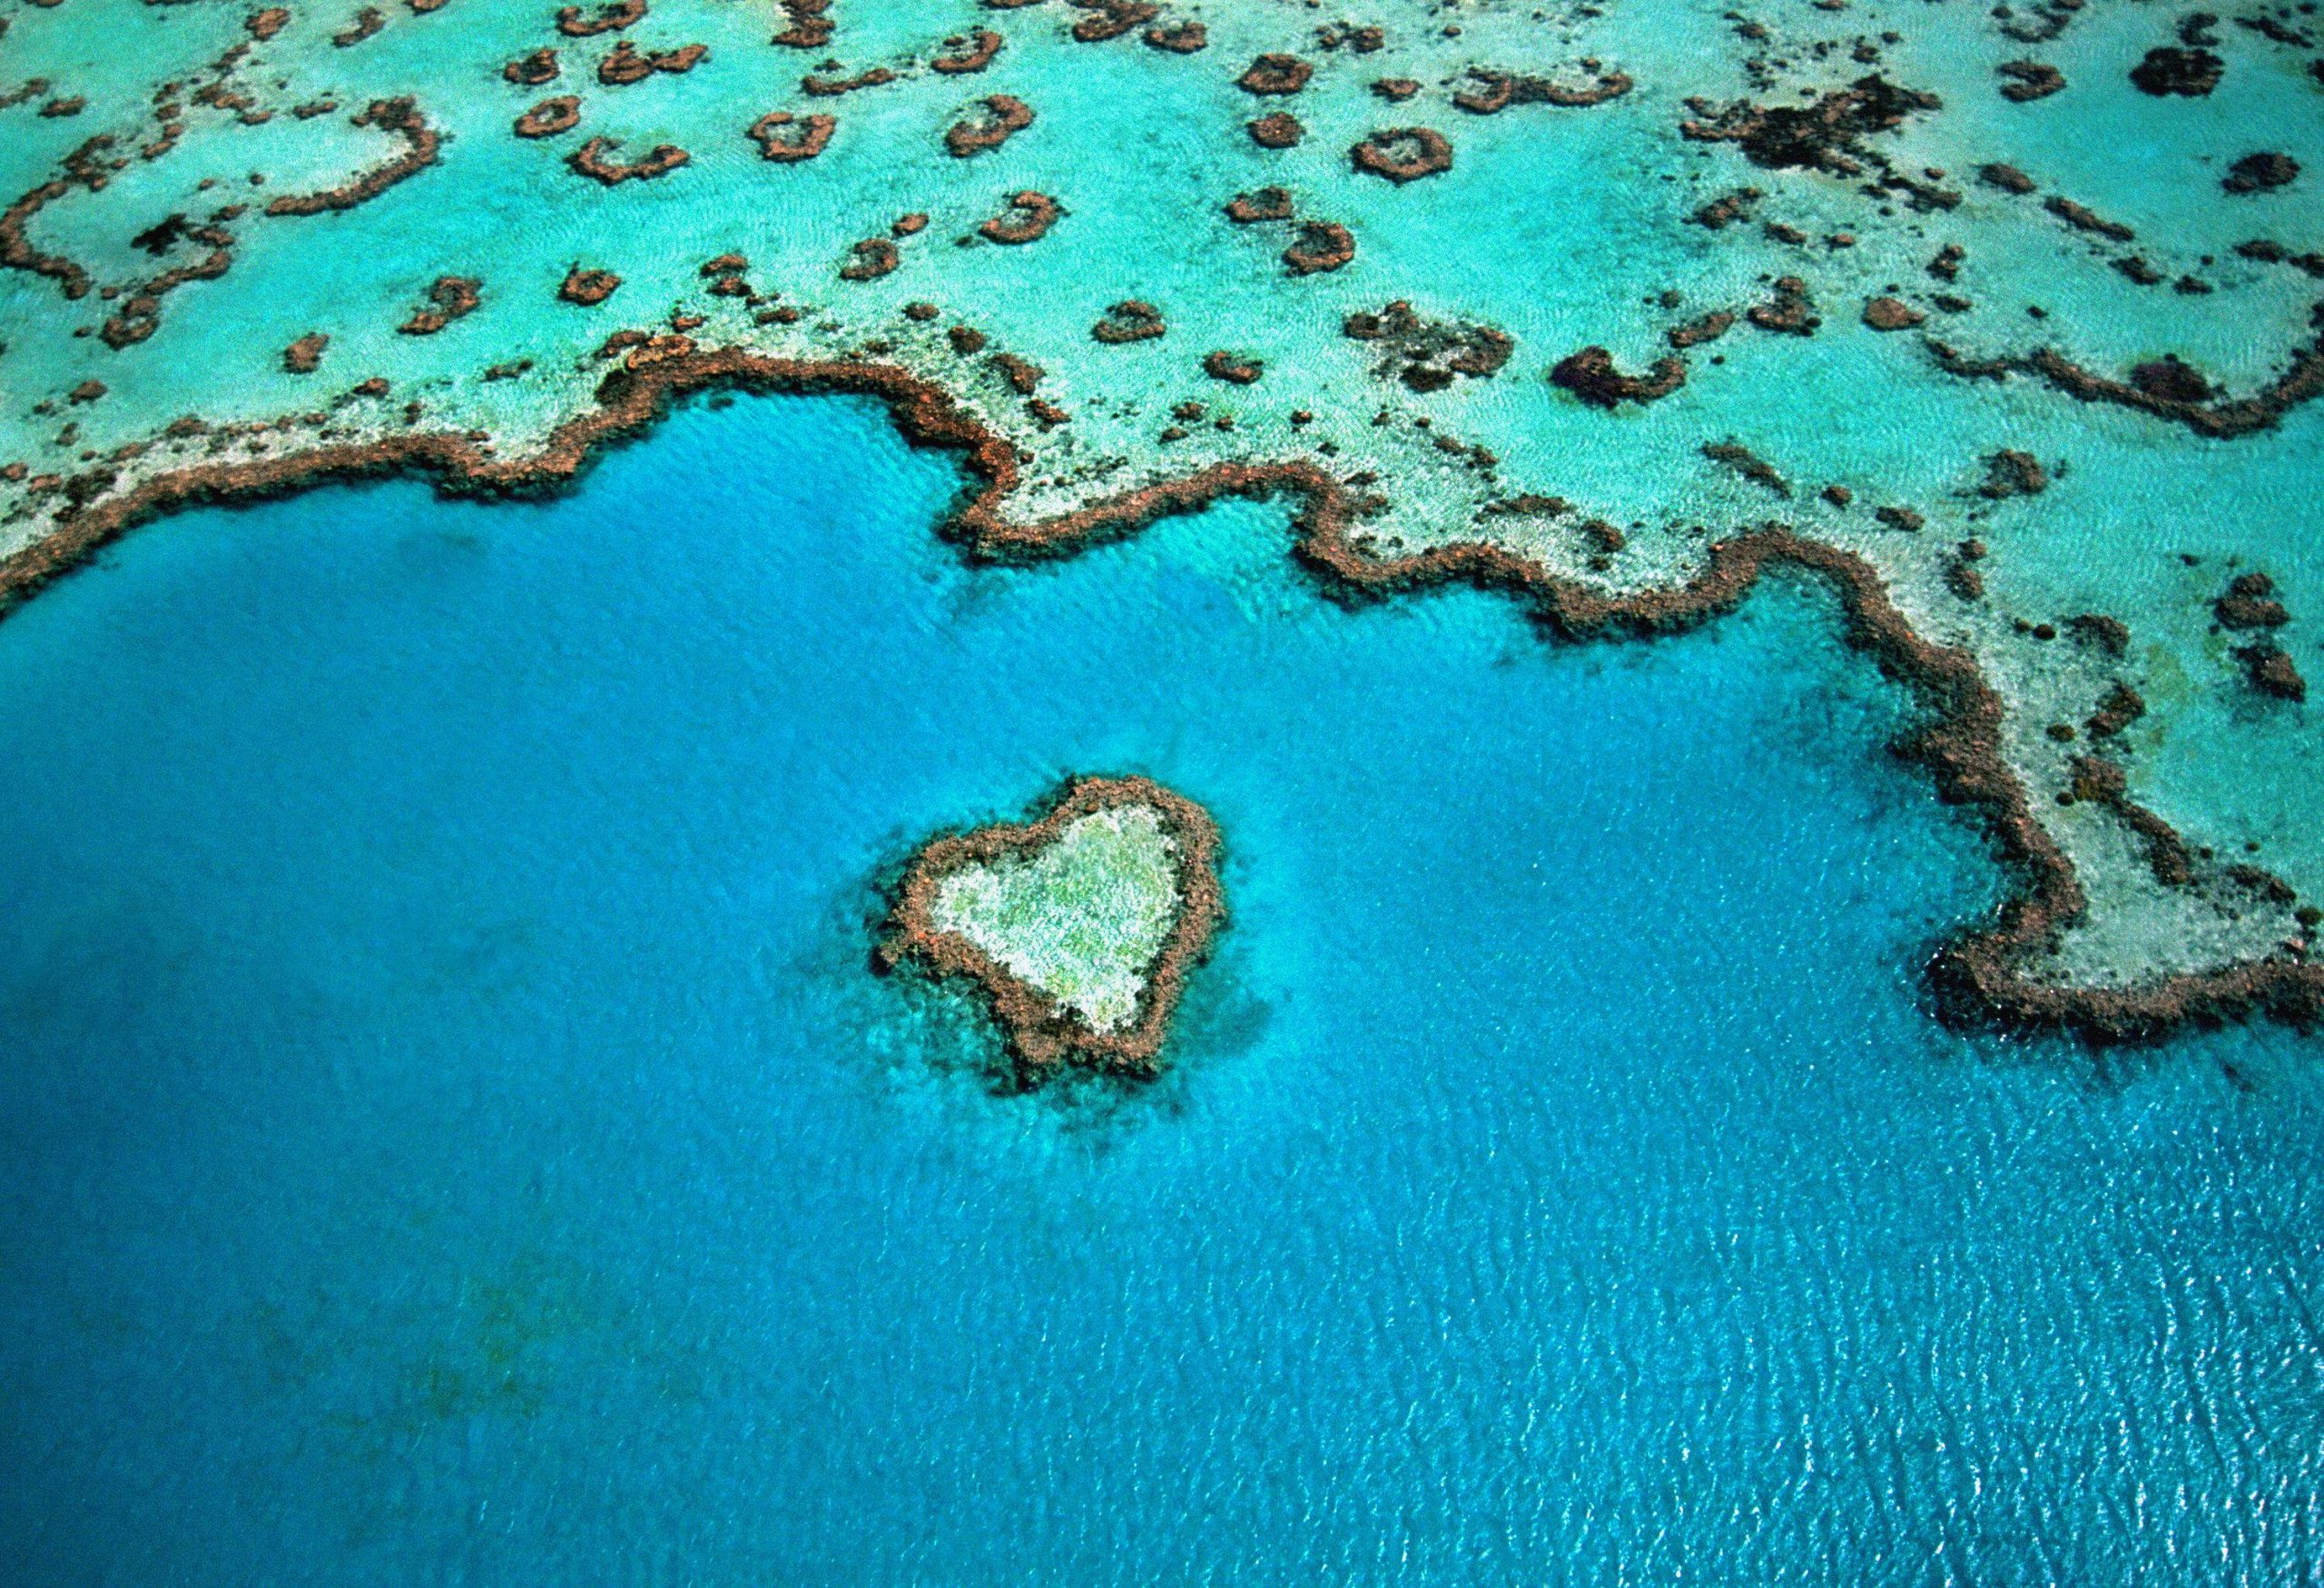 A heart-shaped coral reef emerges from the turquoise ocean waters.